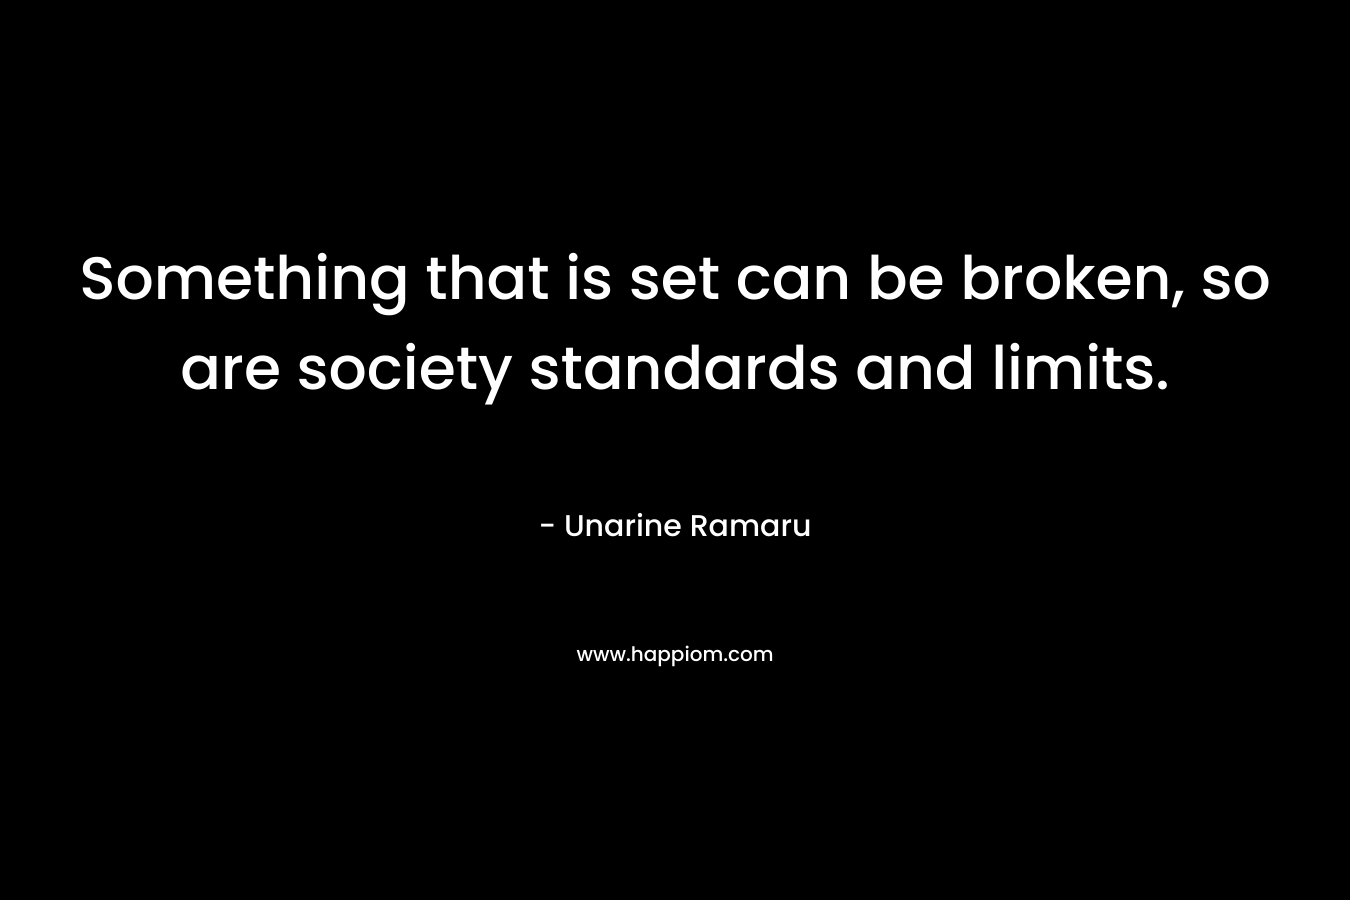 Something that is set can be broken, so are society standards and limits.